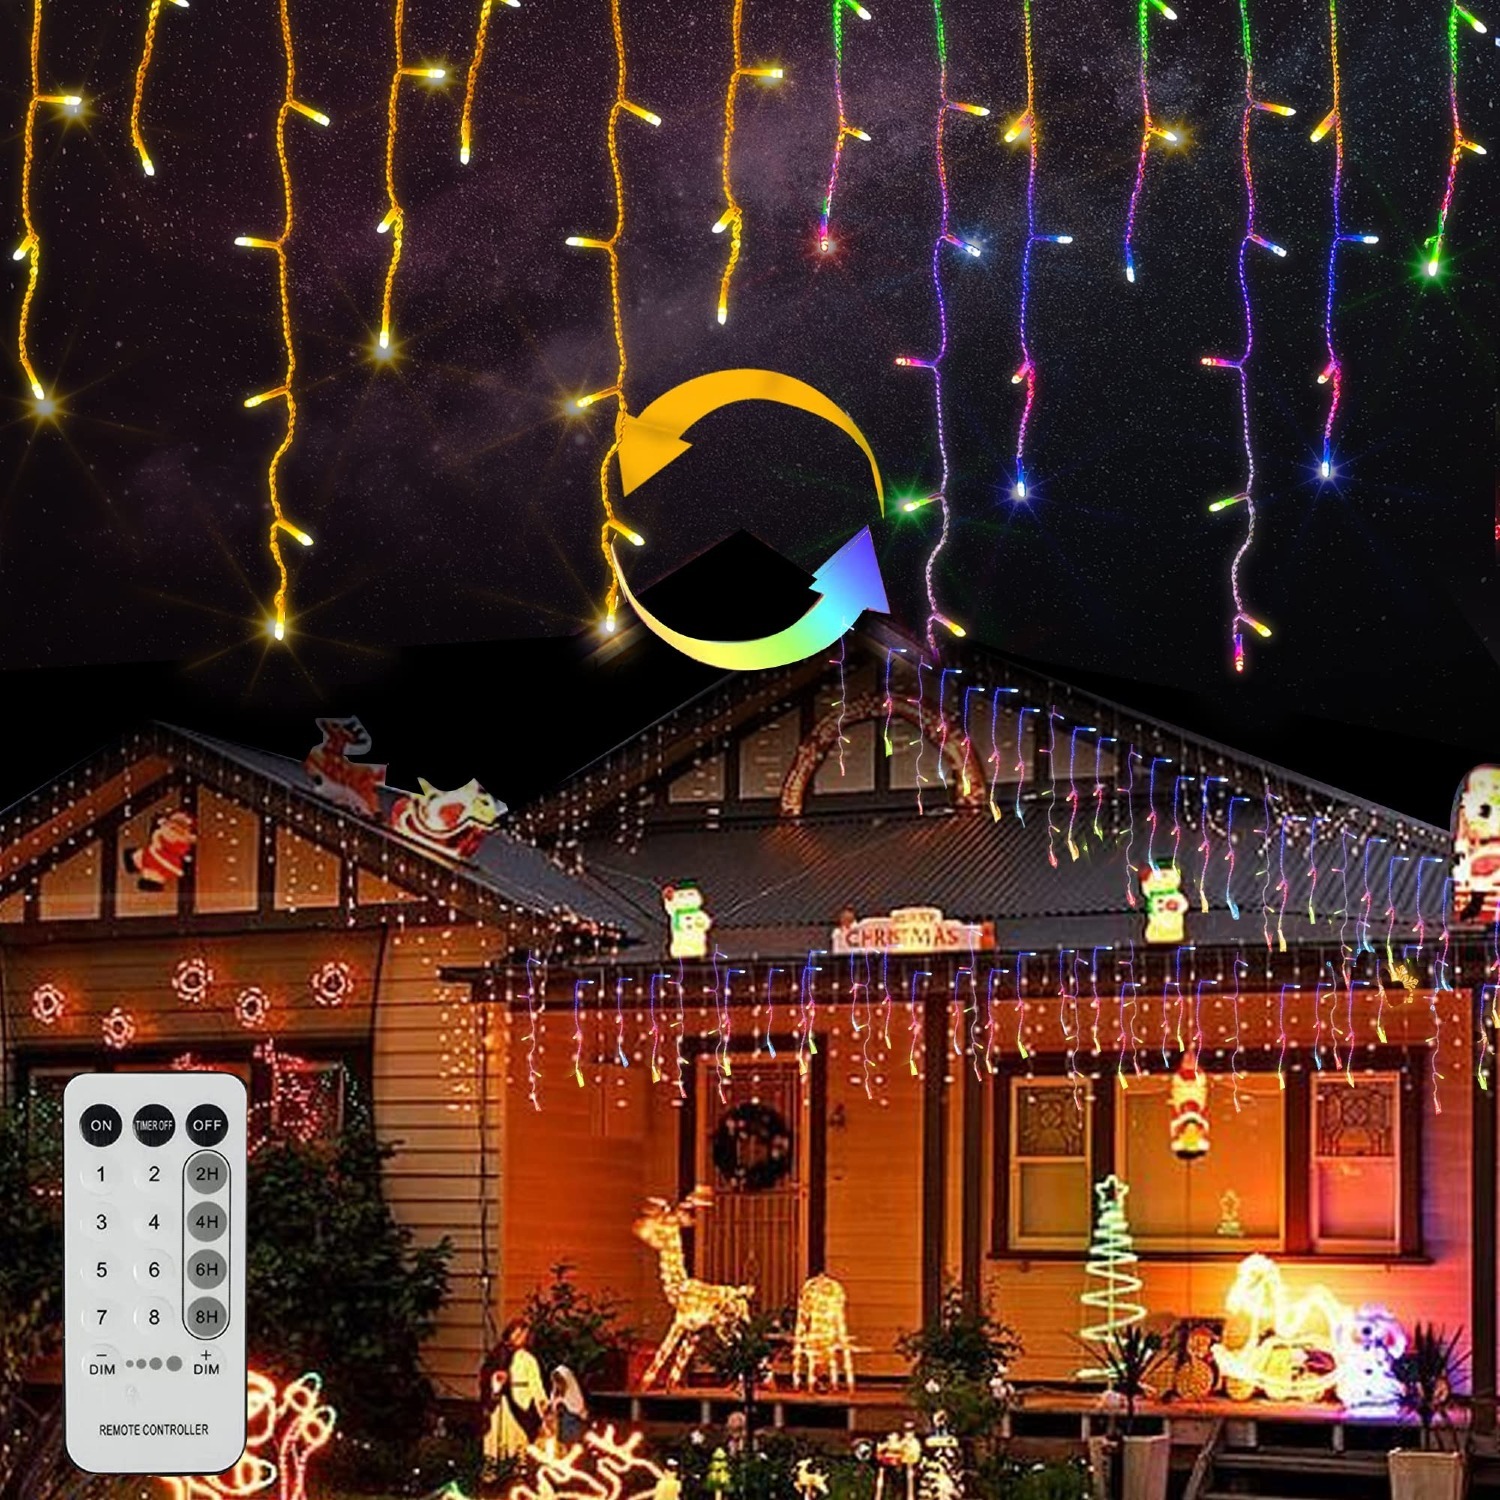 FUNPENY 29.5ft 360 LED Color Changing Christmas Icicle Lights Prime Price $13.50 + Free Shipping w/ Prime or orders